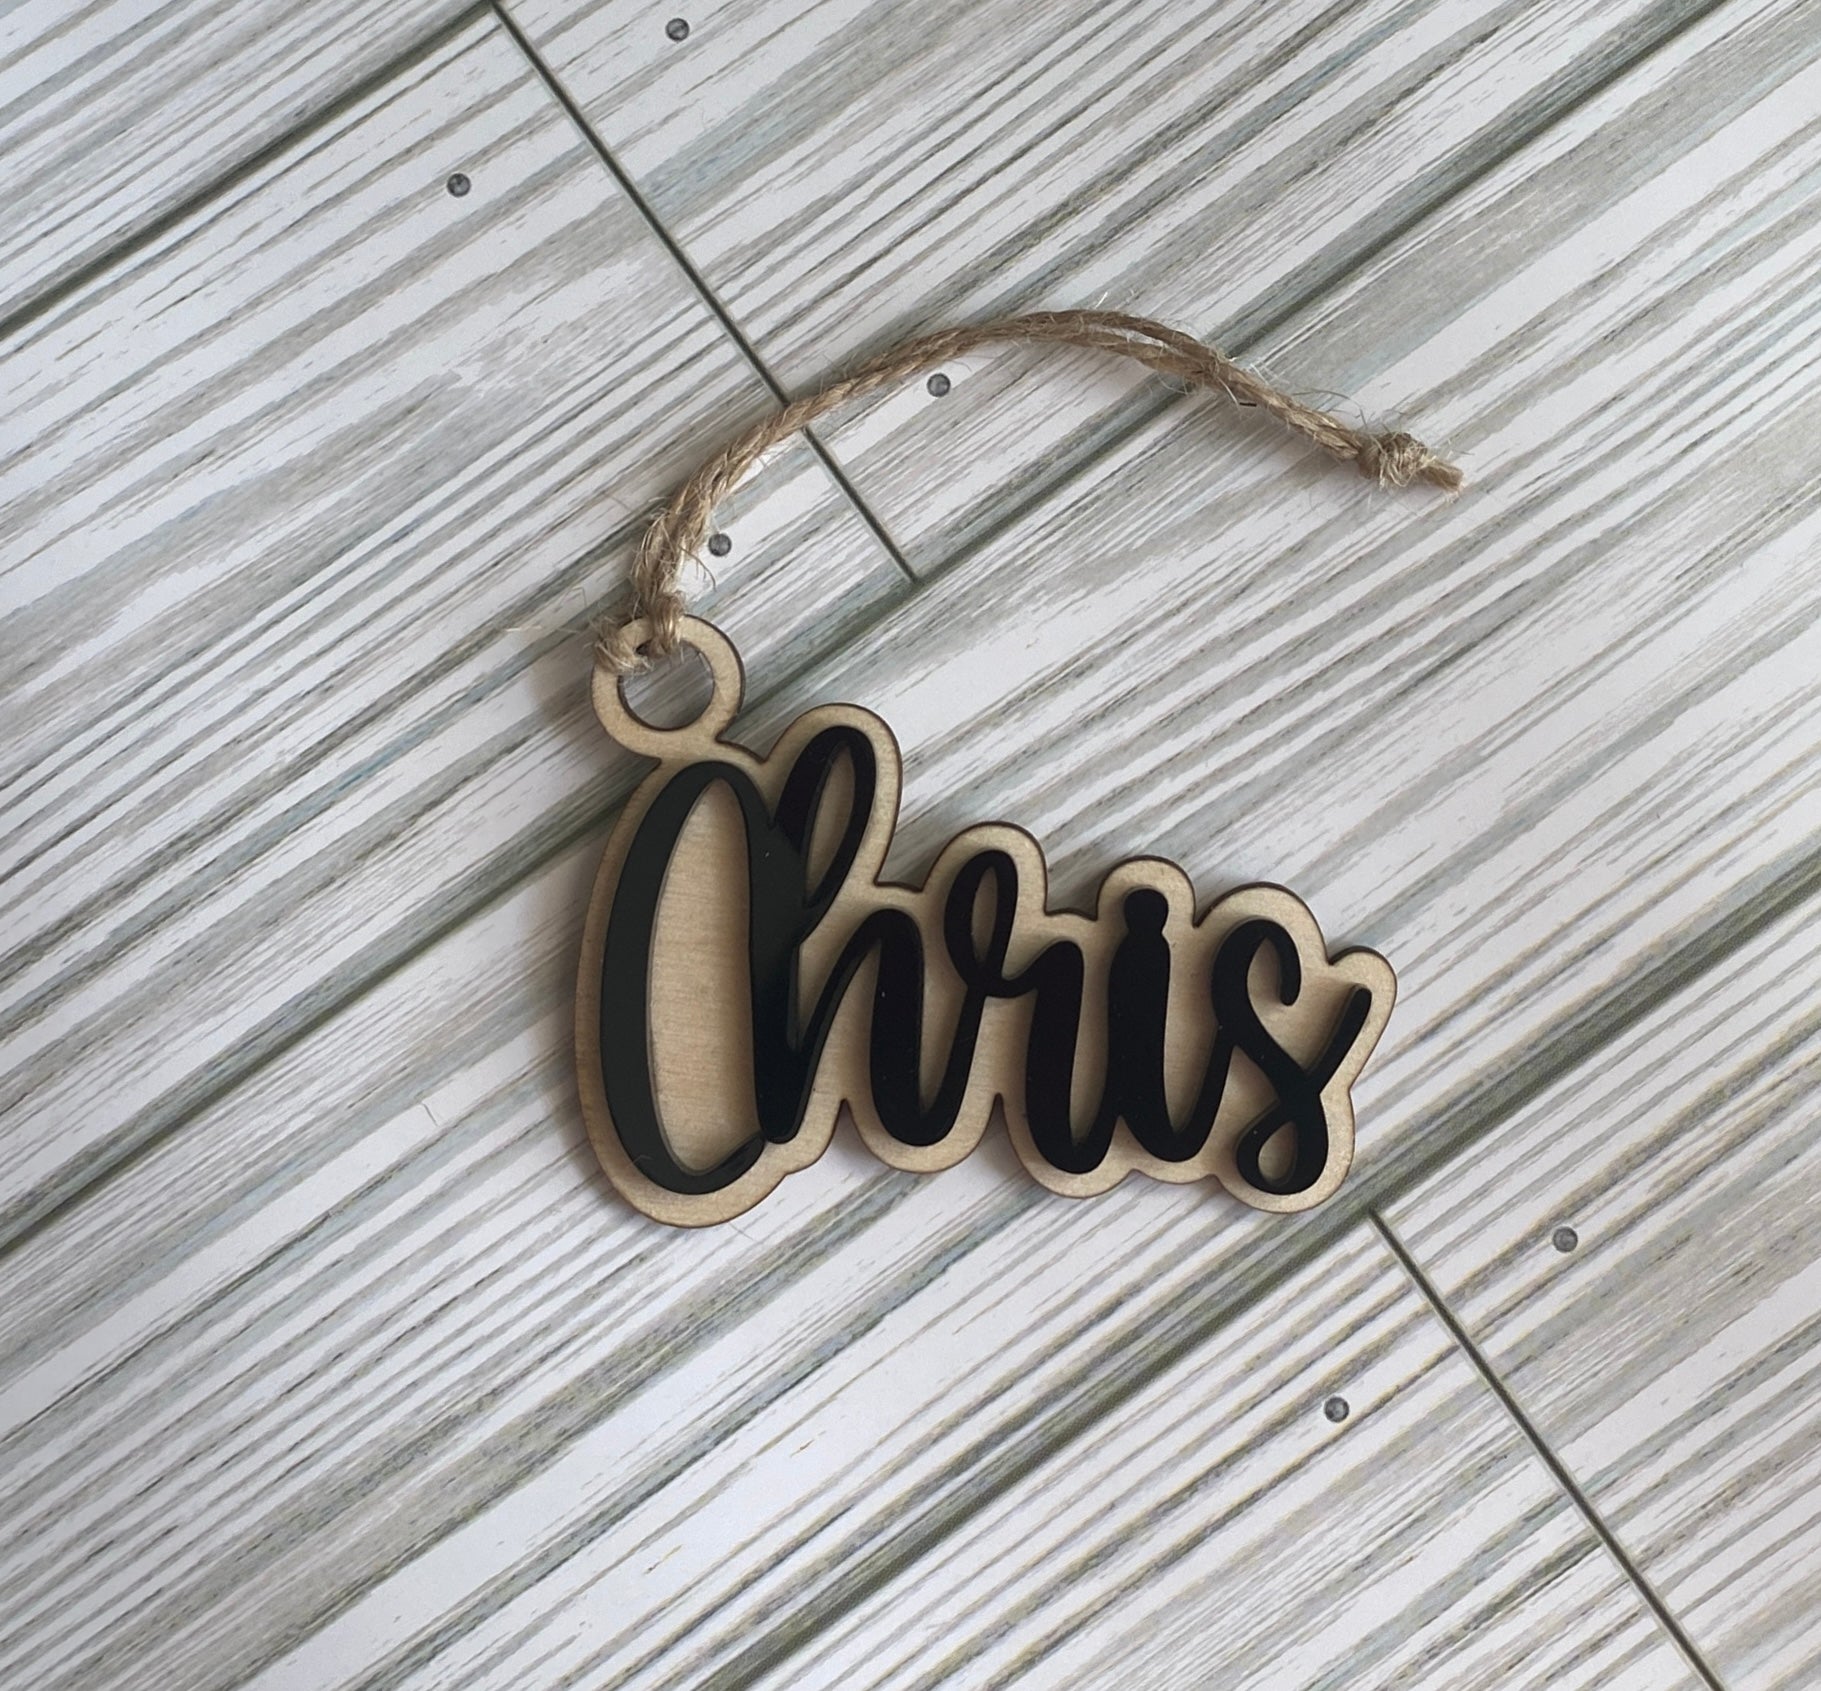 Custom Stanley Name Tags – Hidden Daisies Boutique